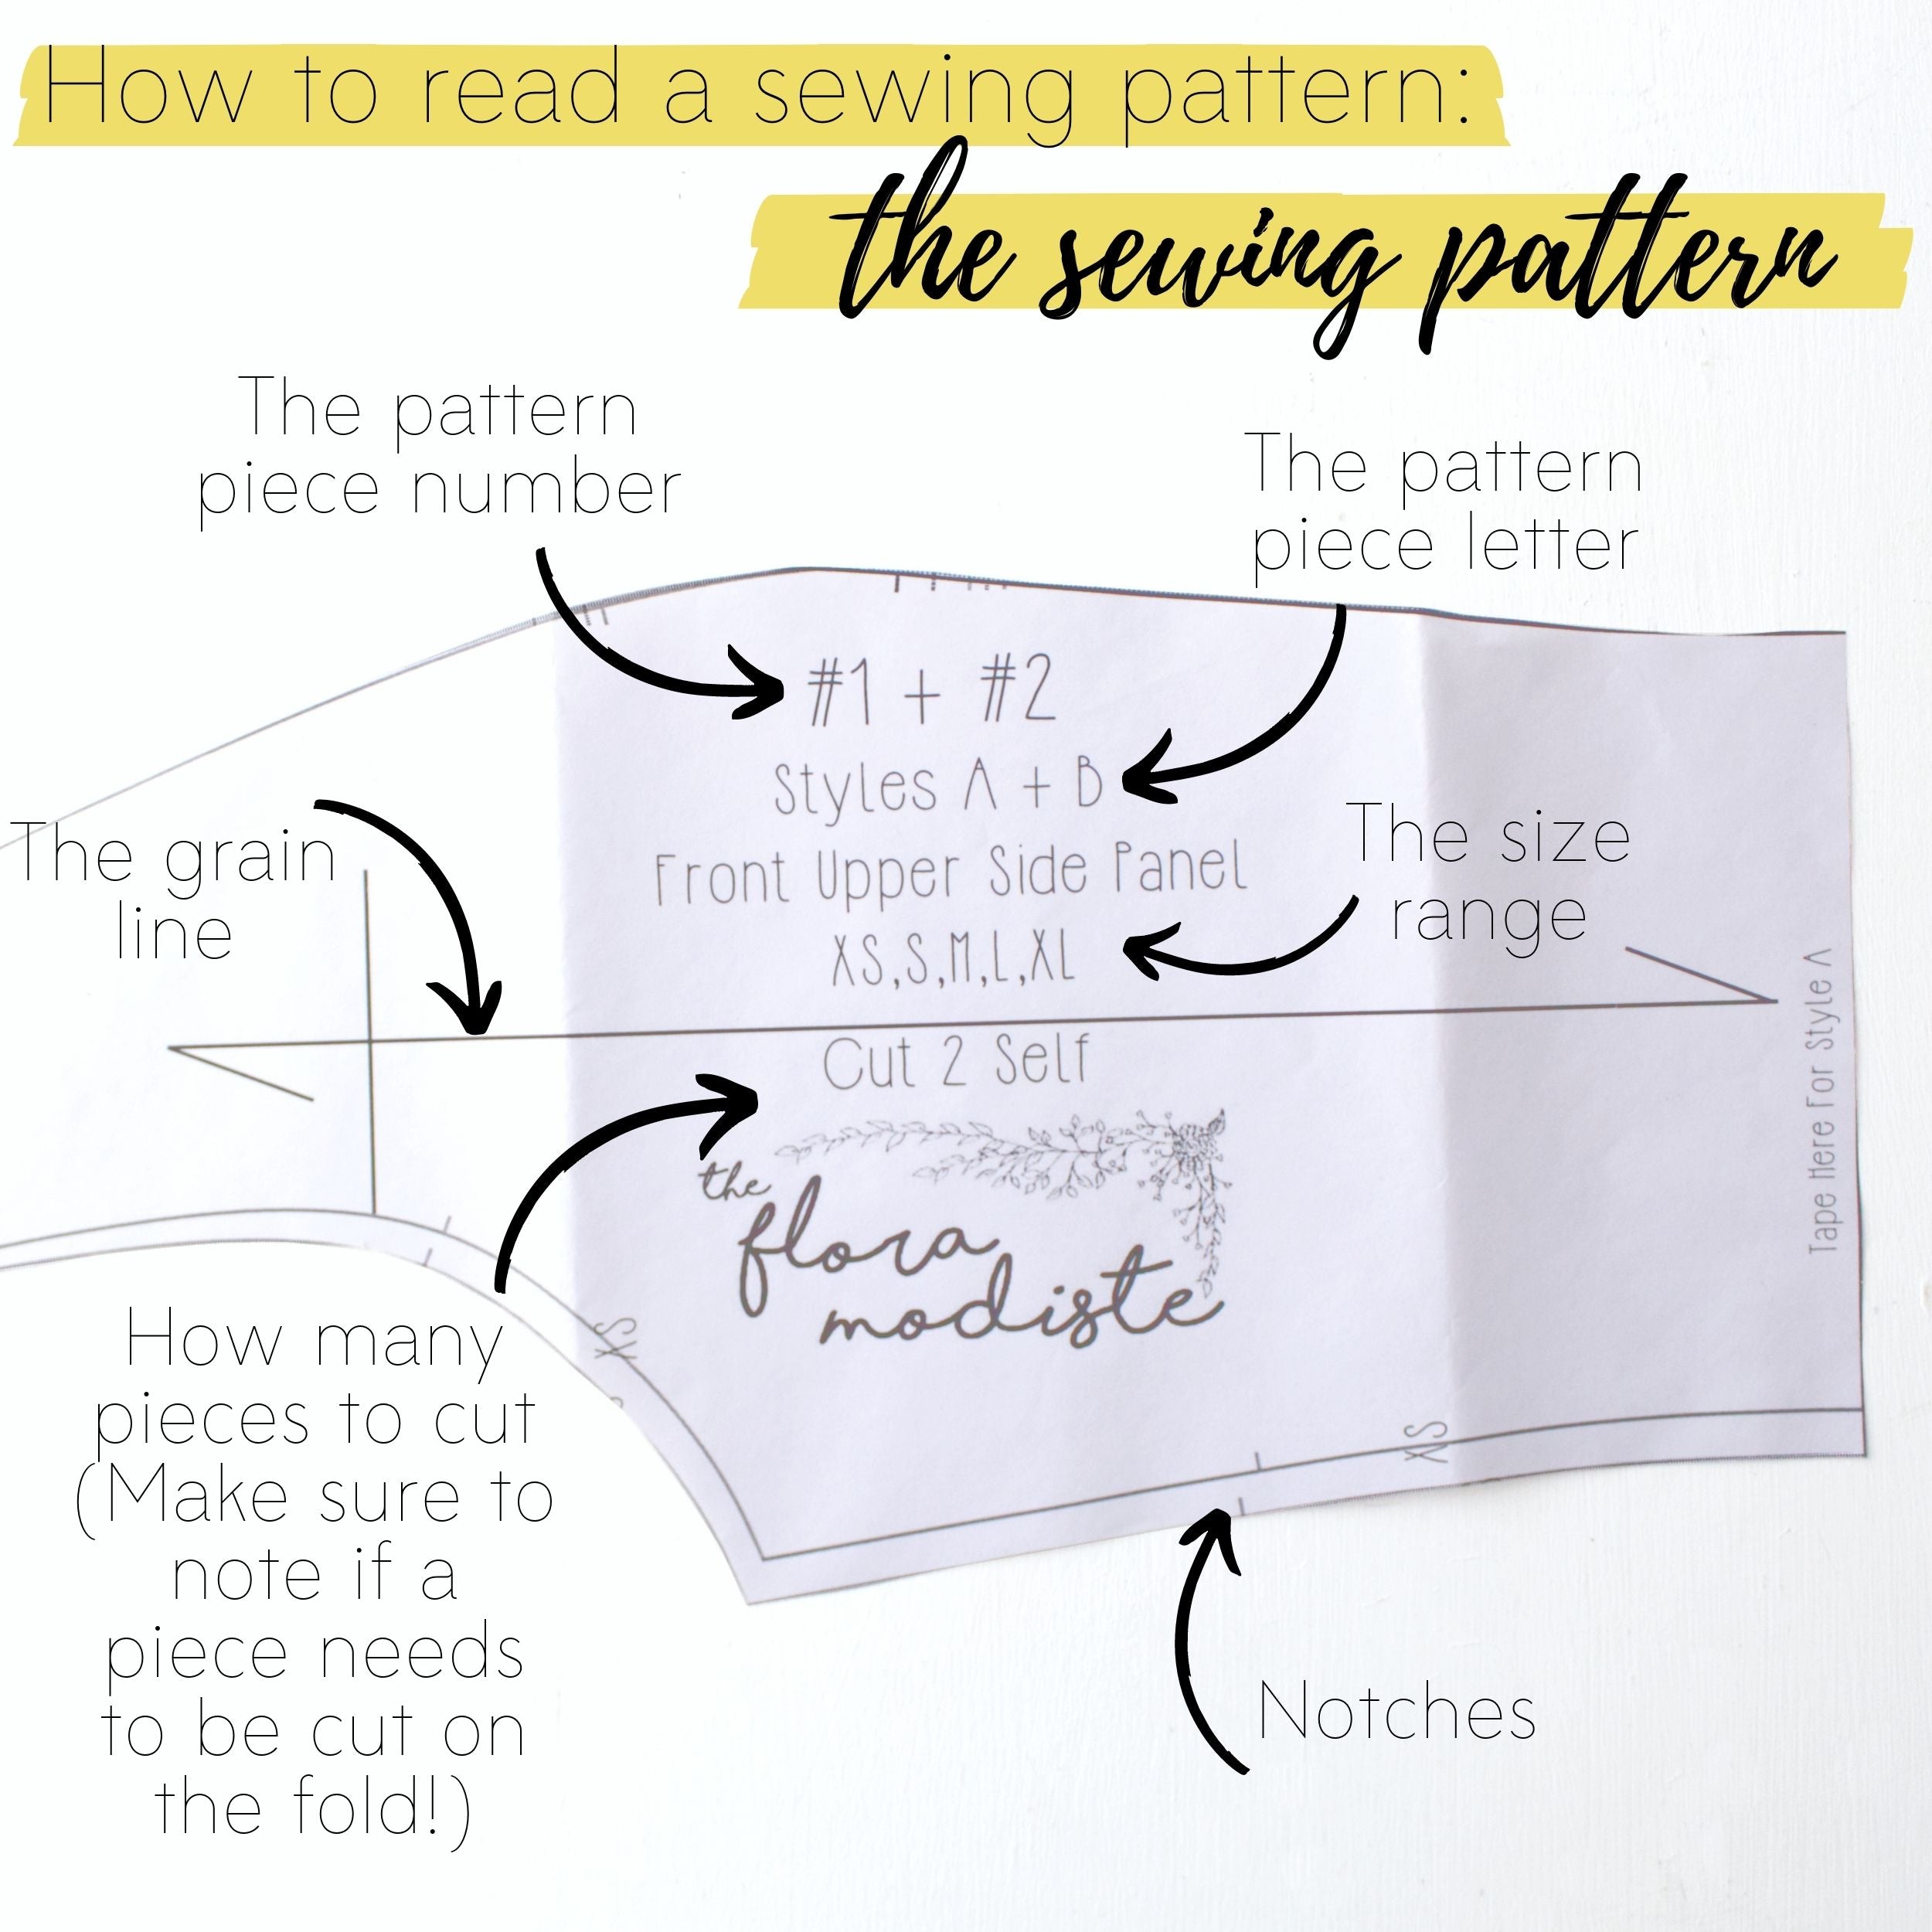 How to read a sewing pattern: The sewing pattern